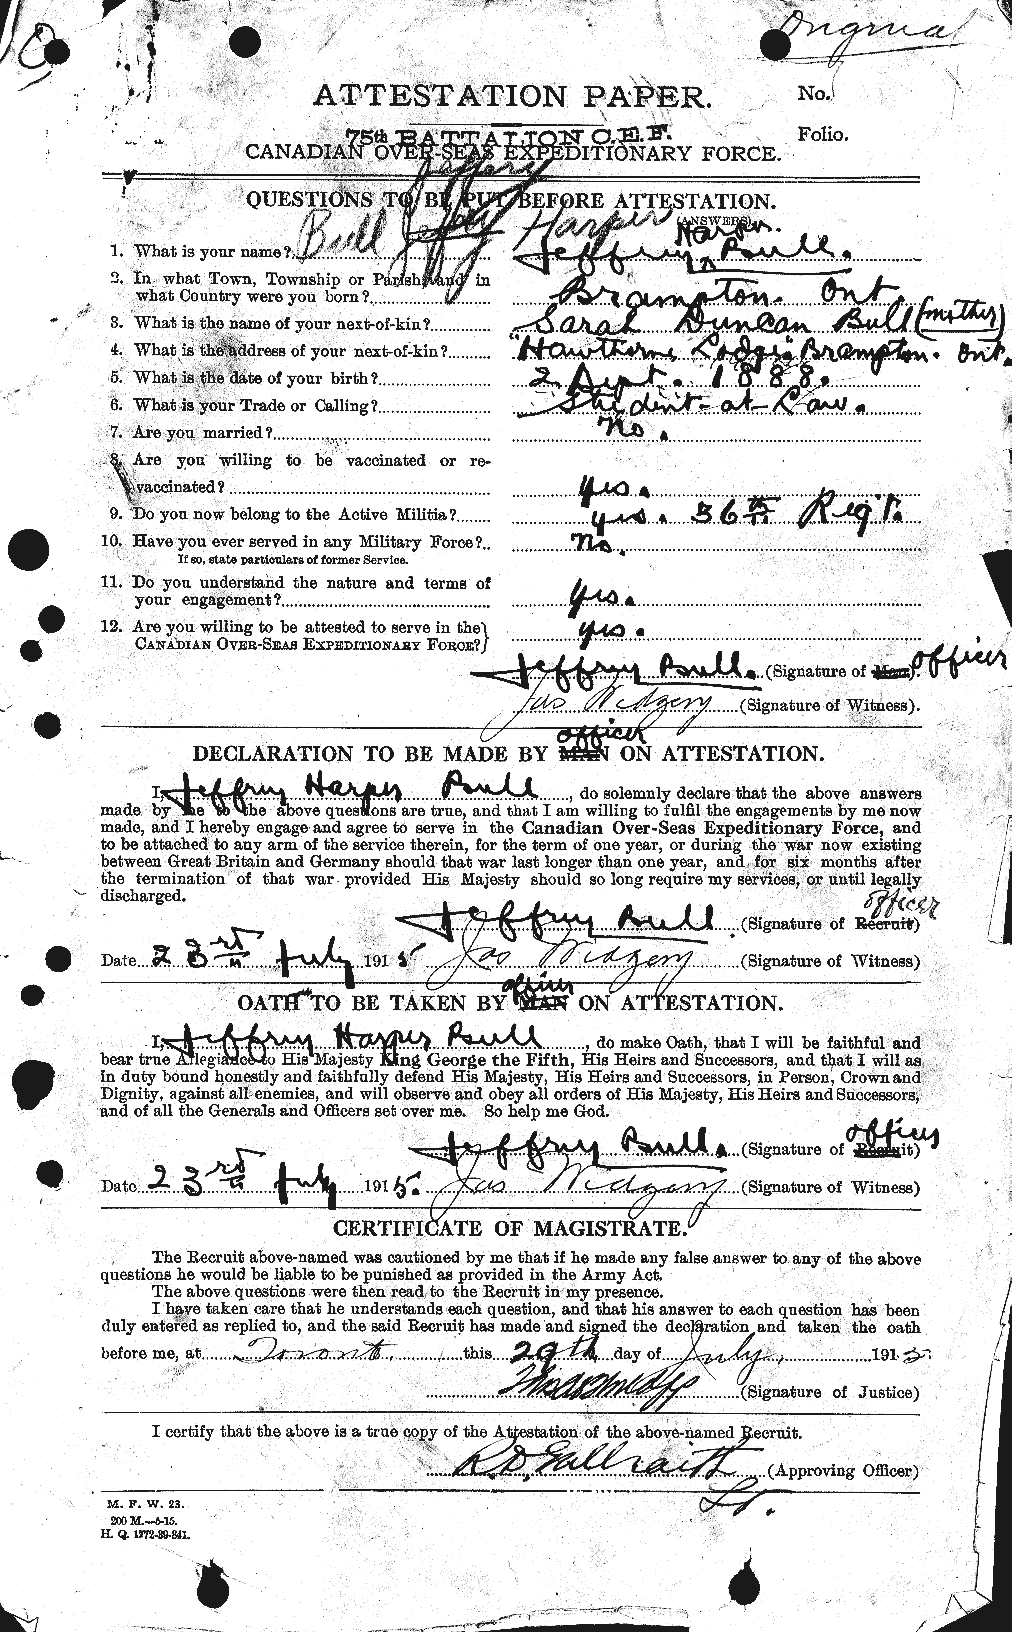 Personnel Records of the First World War - CEF 273418a